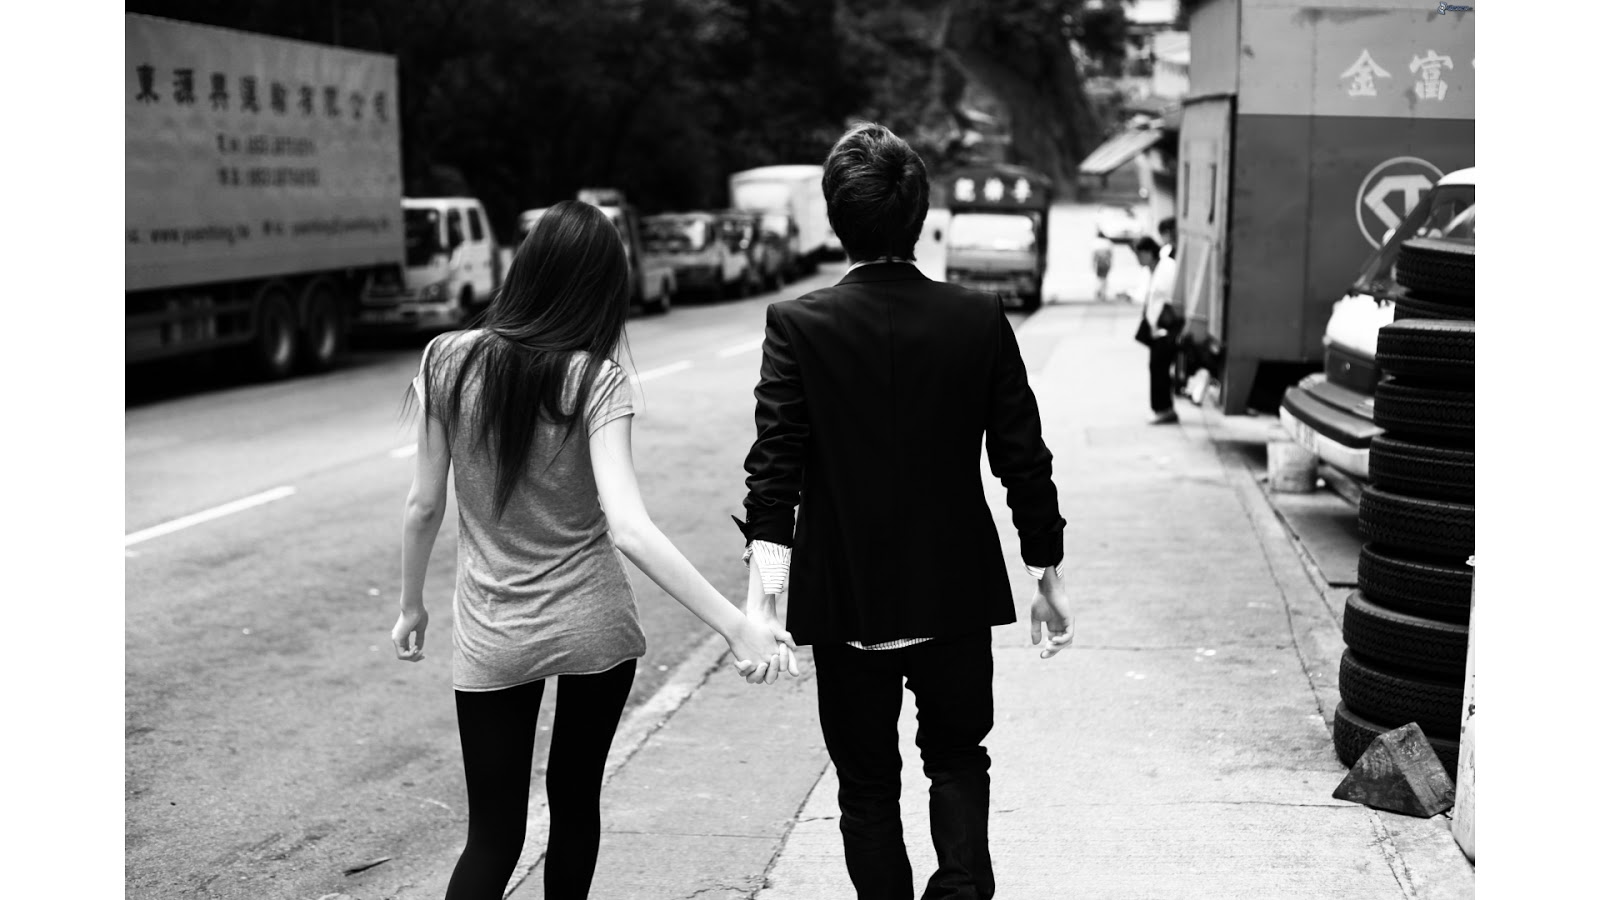 Best 68 Wallpapers of Cool Romantic Boy and Girl in Love